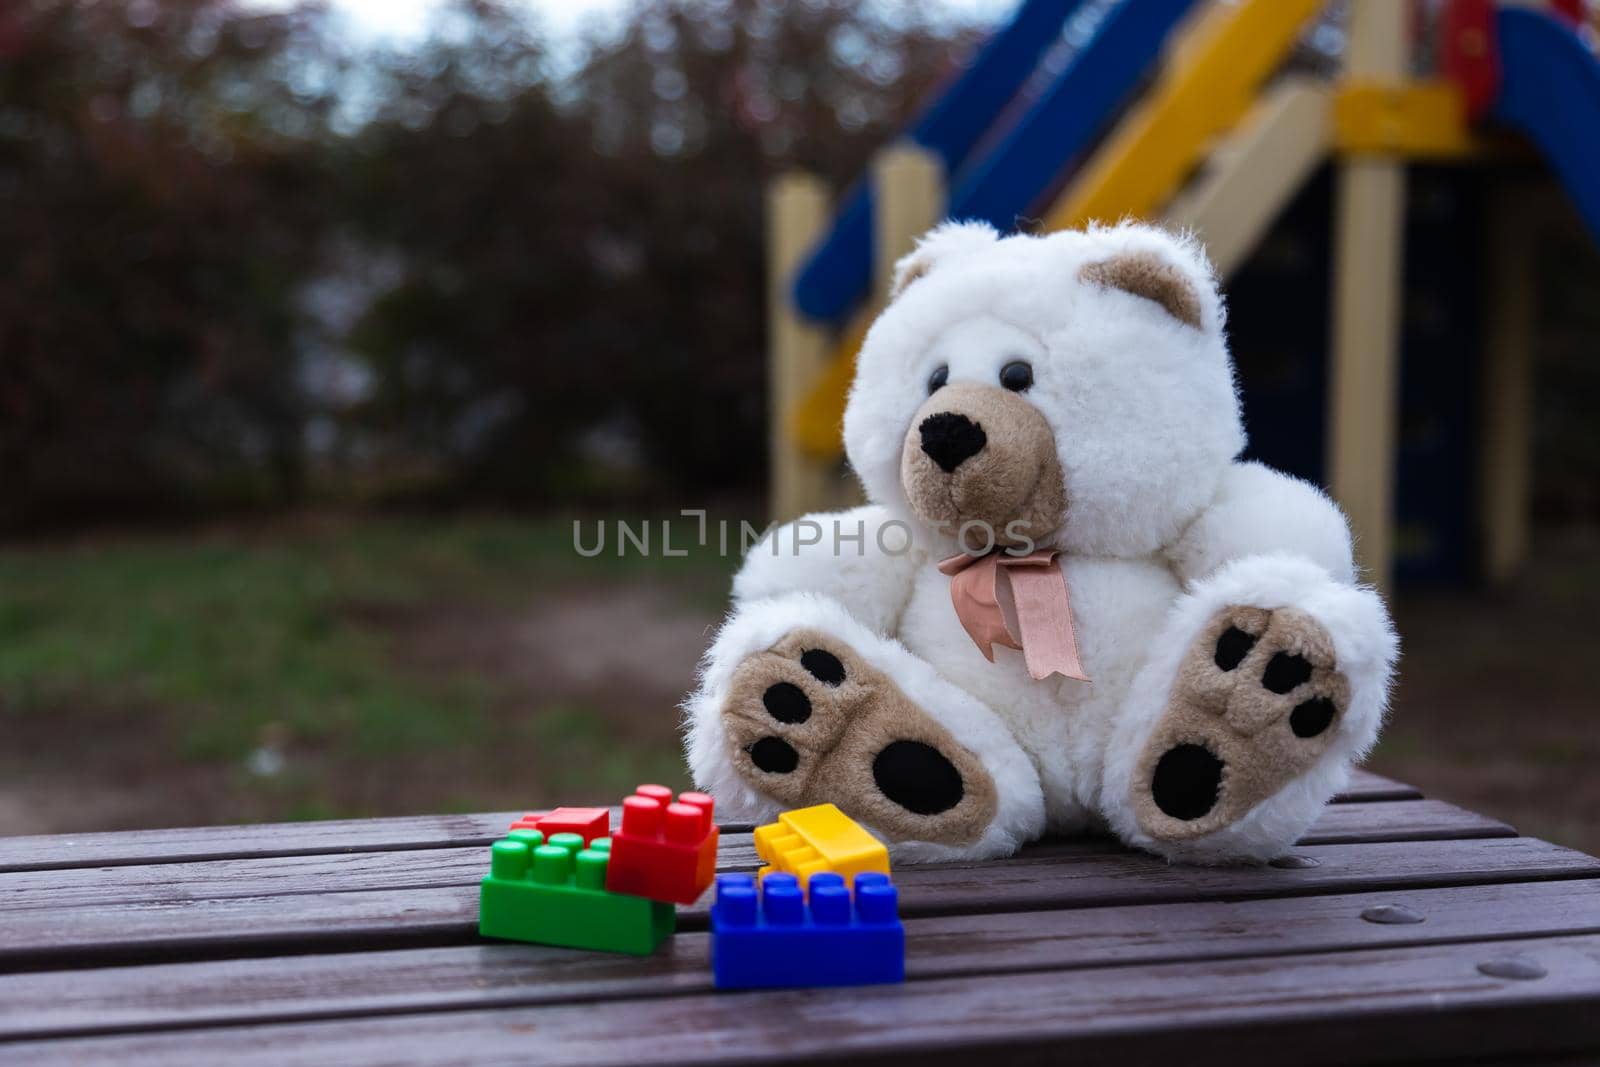 Sad lonely teddy bear. White fluffy teddy bear lonely sits on an old wooden bench in a overgrown garden.